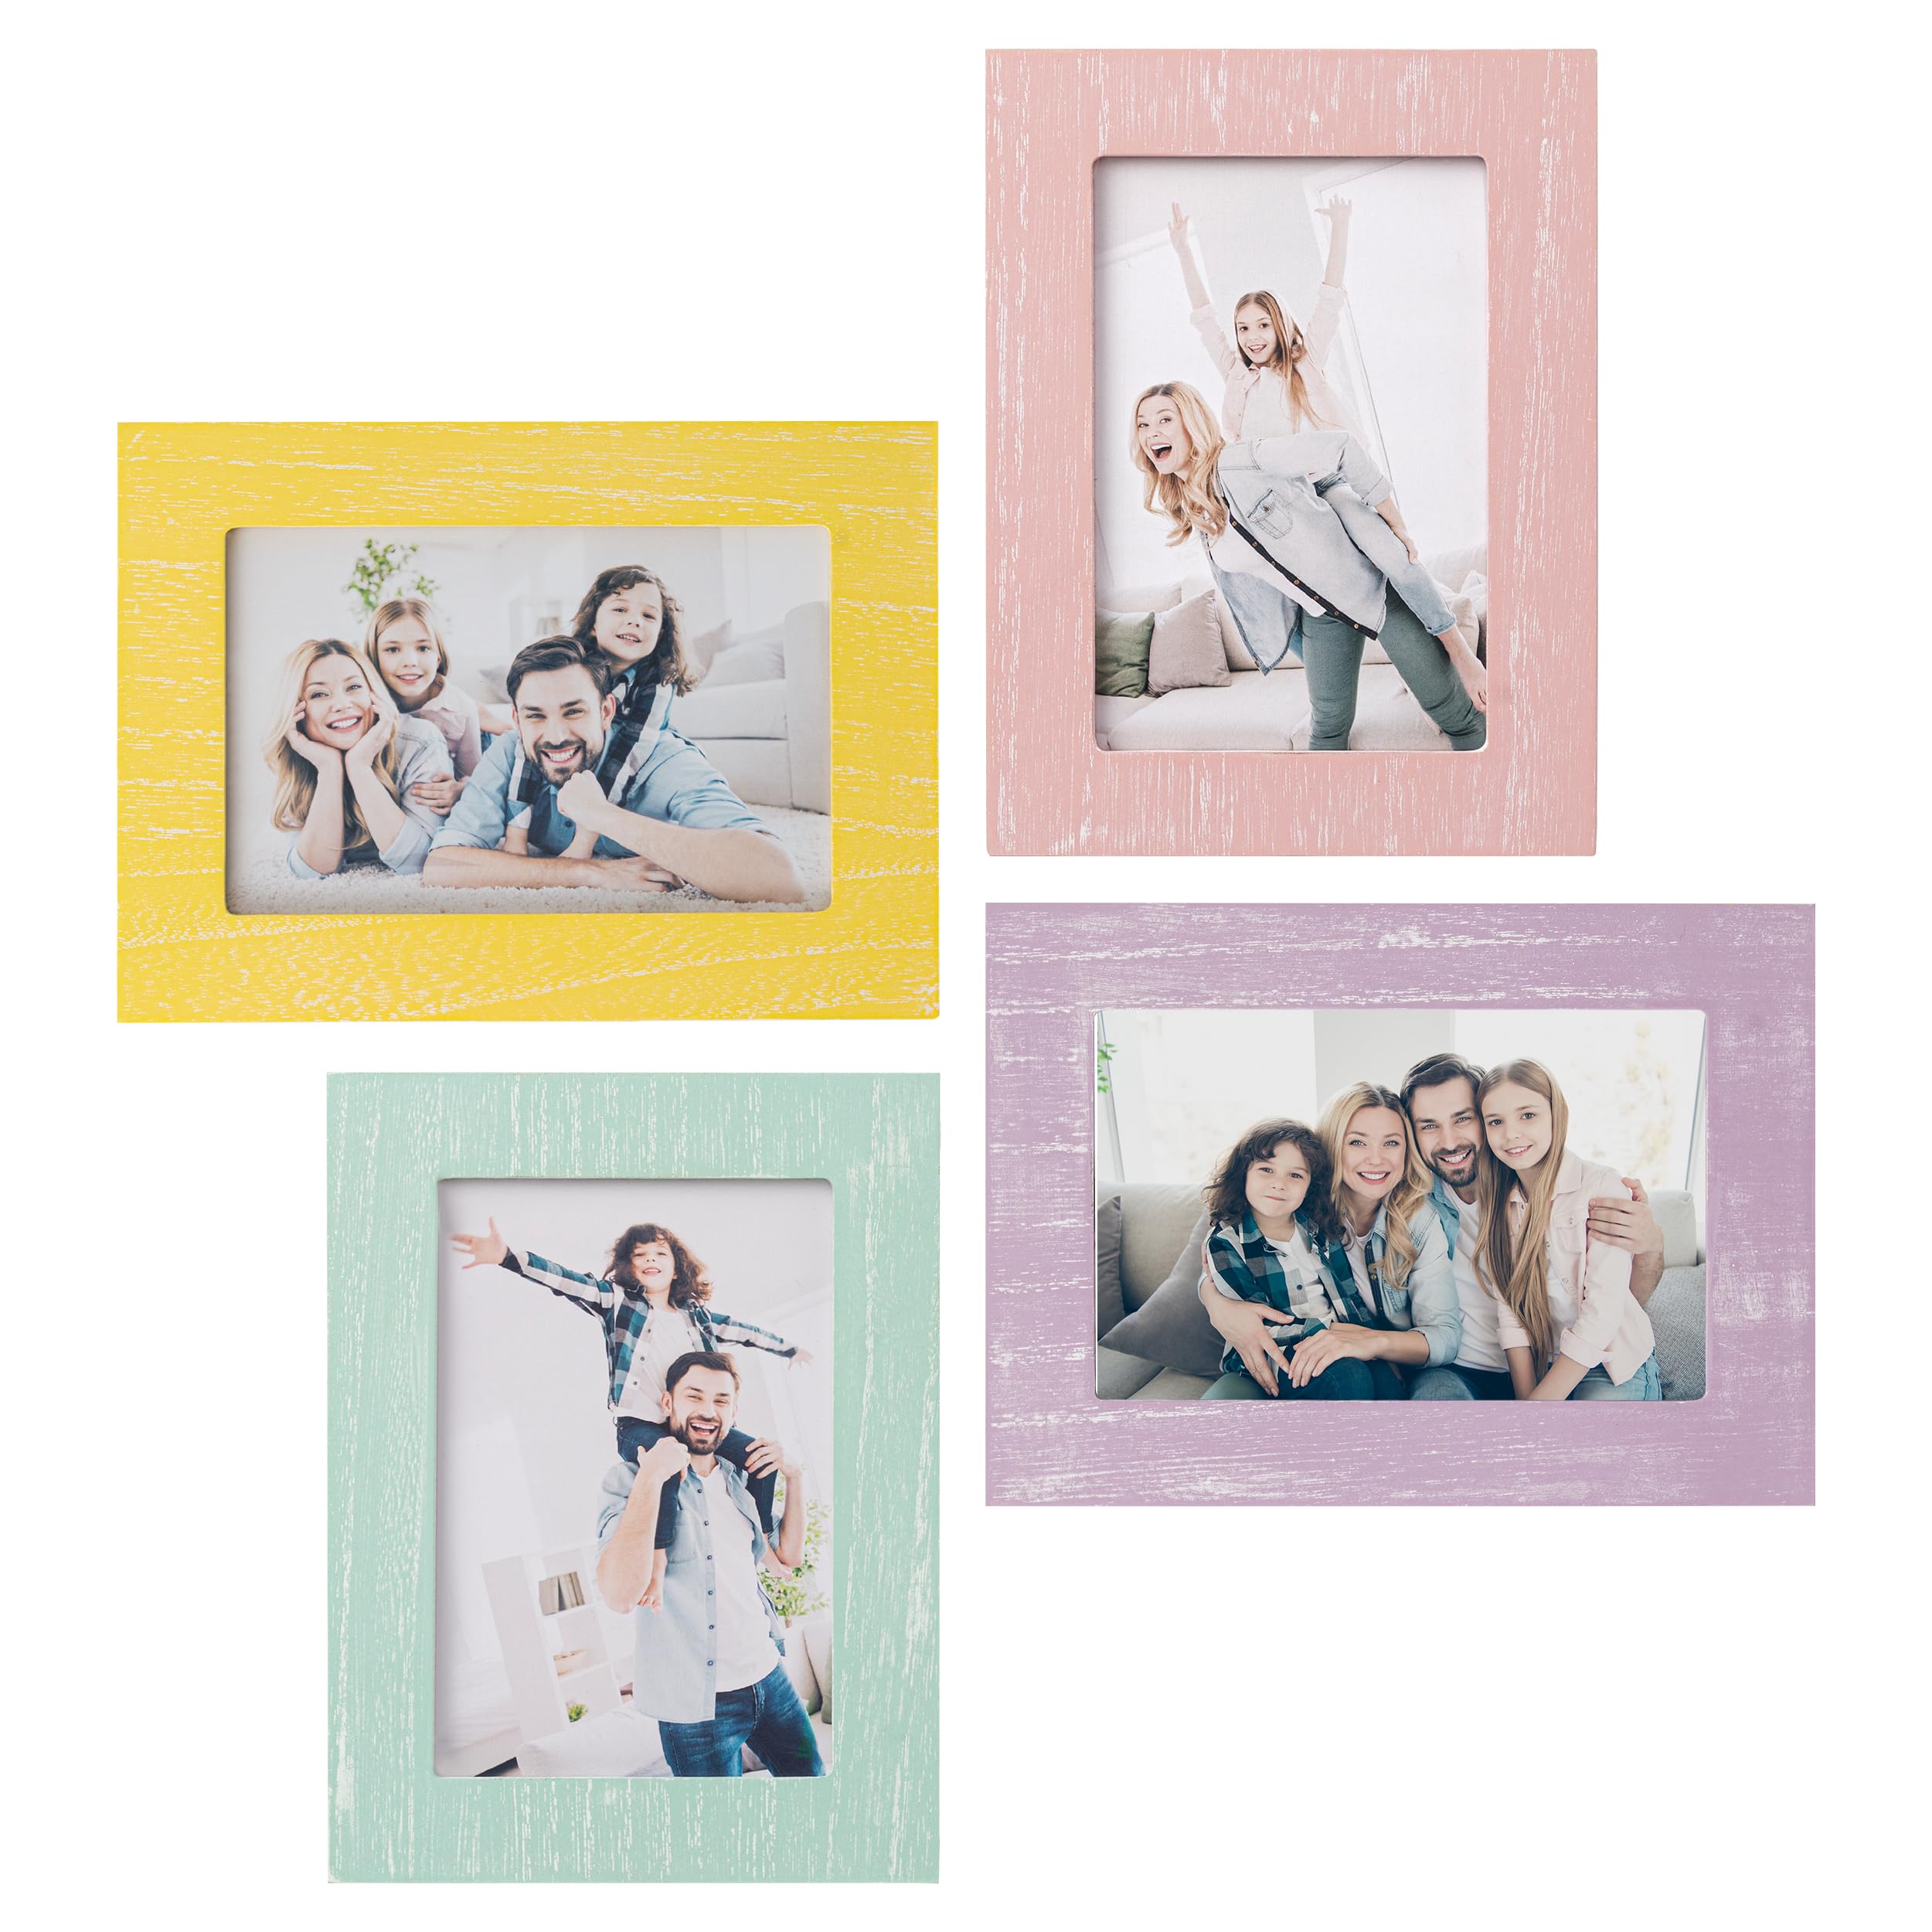 eletecpro 4x6 Picture Frame Set of 4 with HD Glass, Rustic Frame with Wood Pattern Designs, Table Top & Wall Mount Colorful Phot